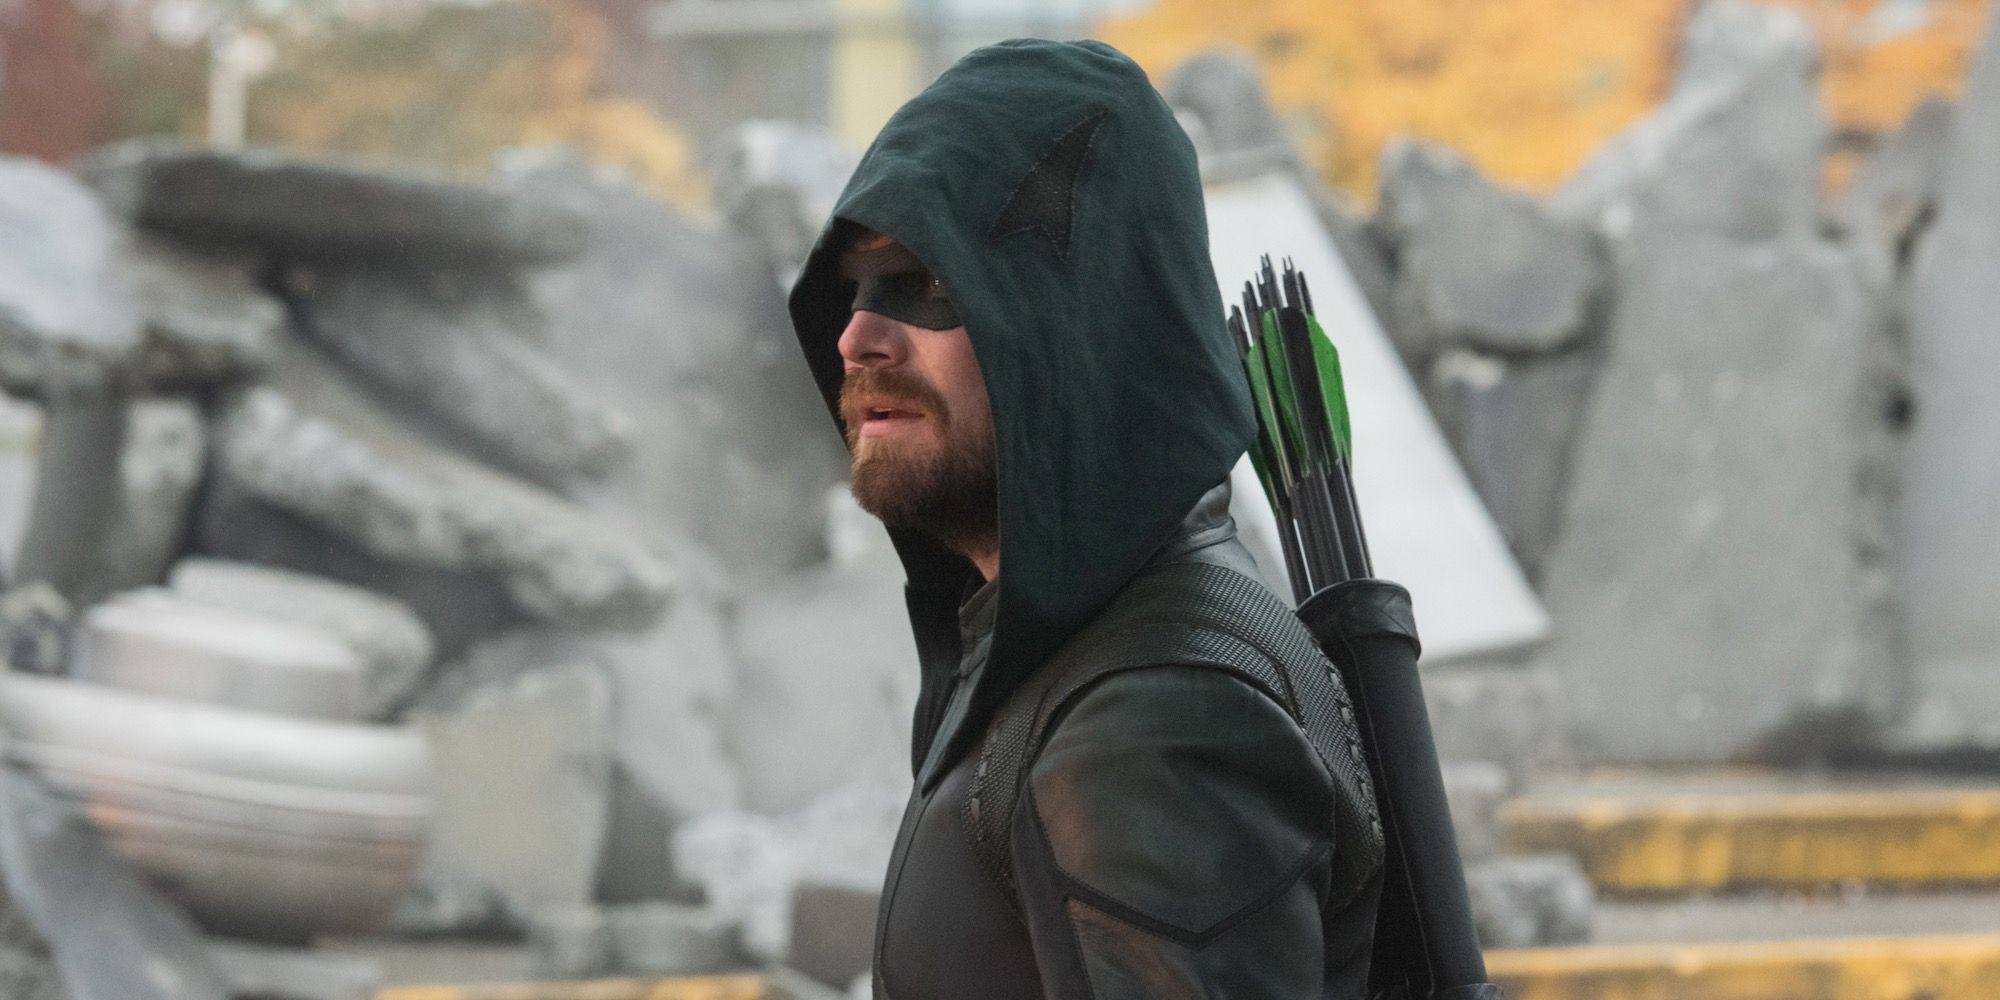 Stephen Amell as Green Arrow in Crisis on Infinite Earths Part 1